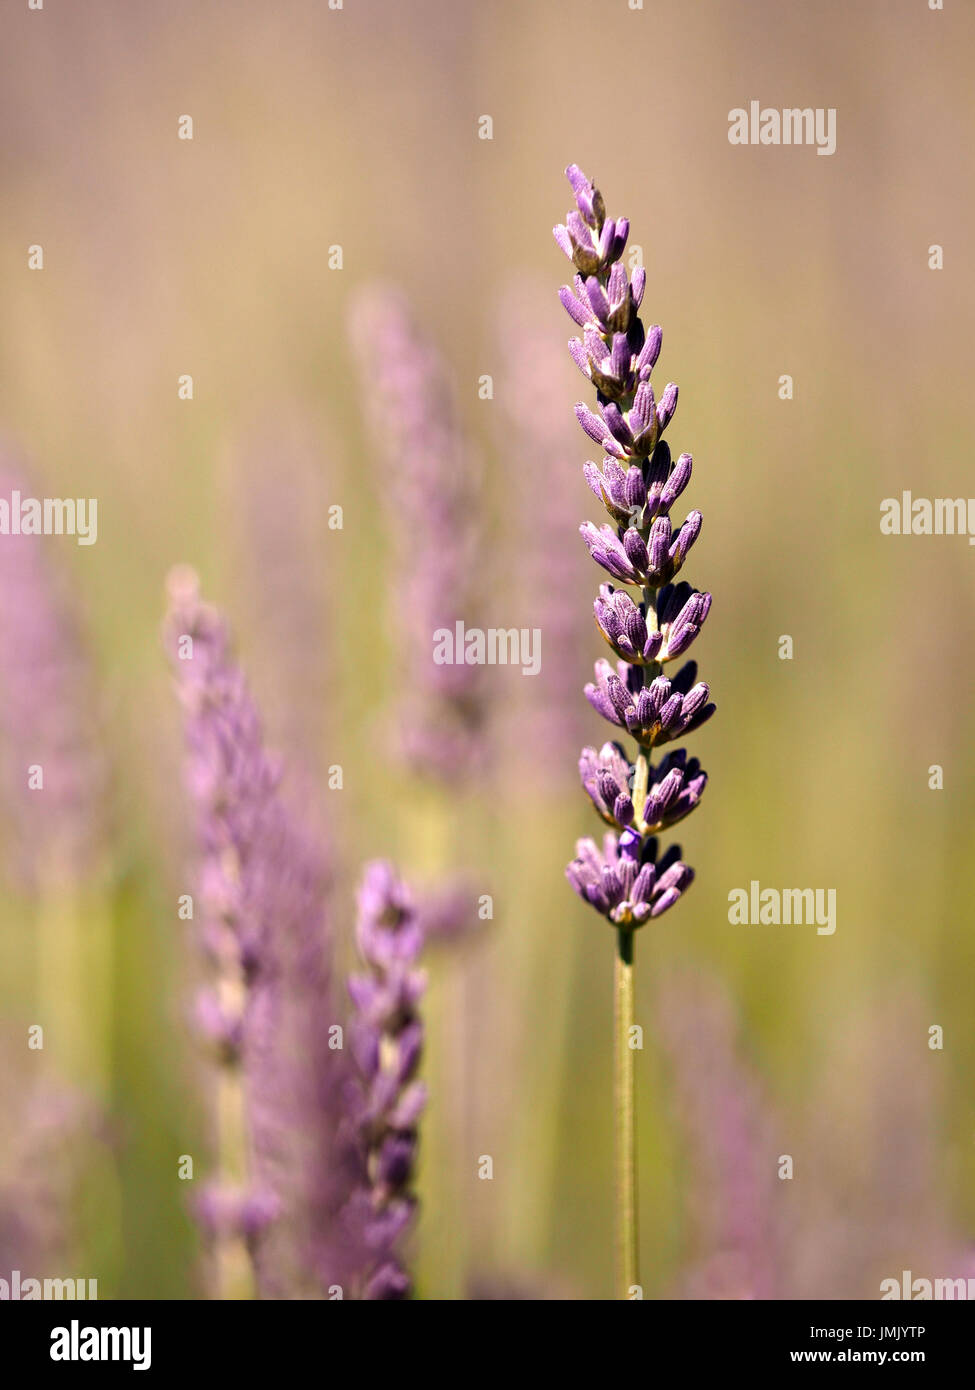 Single Lavender in Focus with More Lavender Flowers Soft Focused in the Background Stock Photo